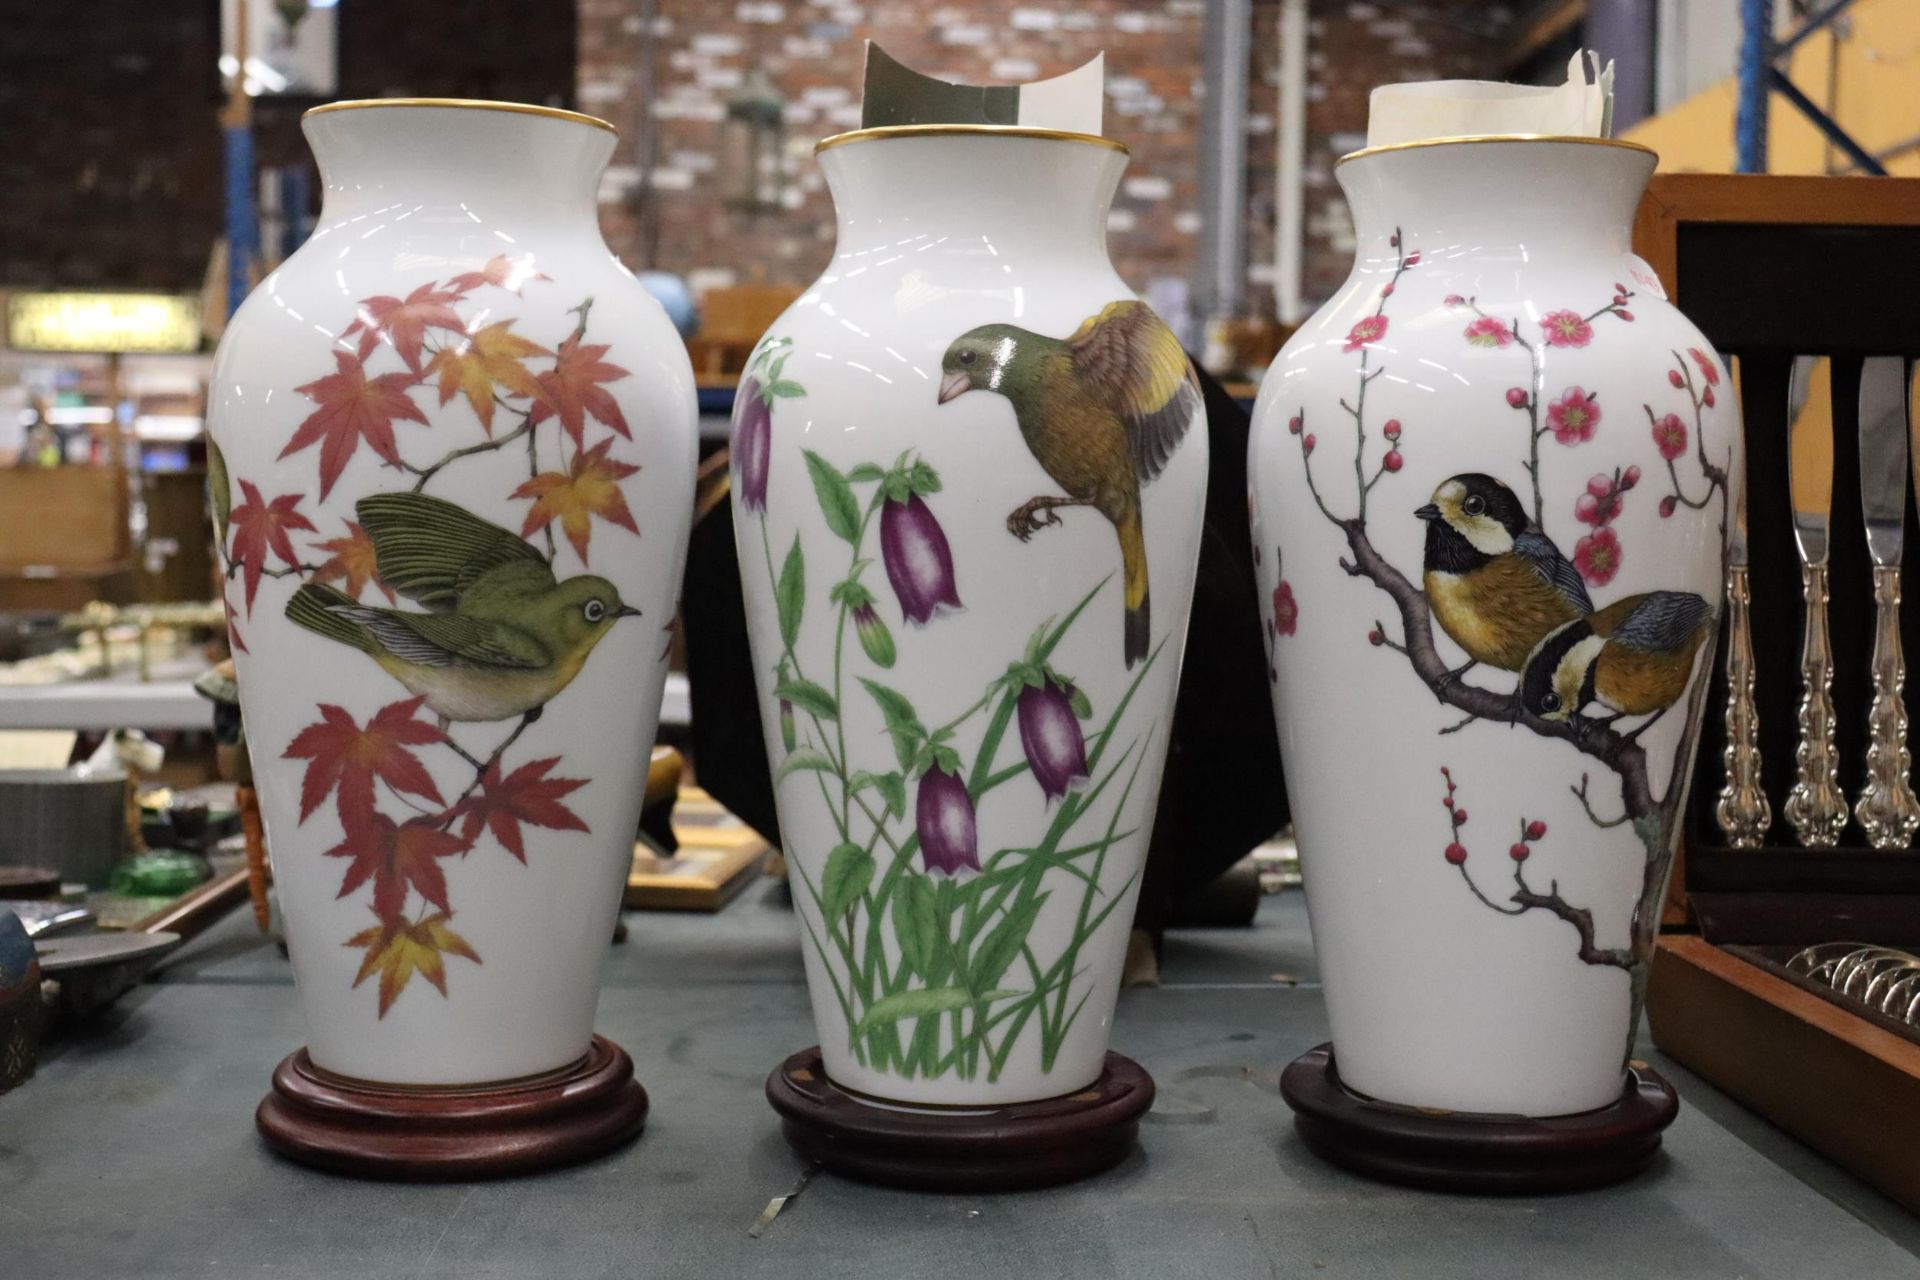 THREE LARGE FRANKLIN PORCELAIN VASES WITH JAPANESE CHARACTERS TO BASE AND WOODEN STANDS, THE HERALDS - Image 4 of 7